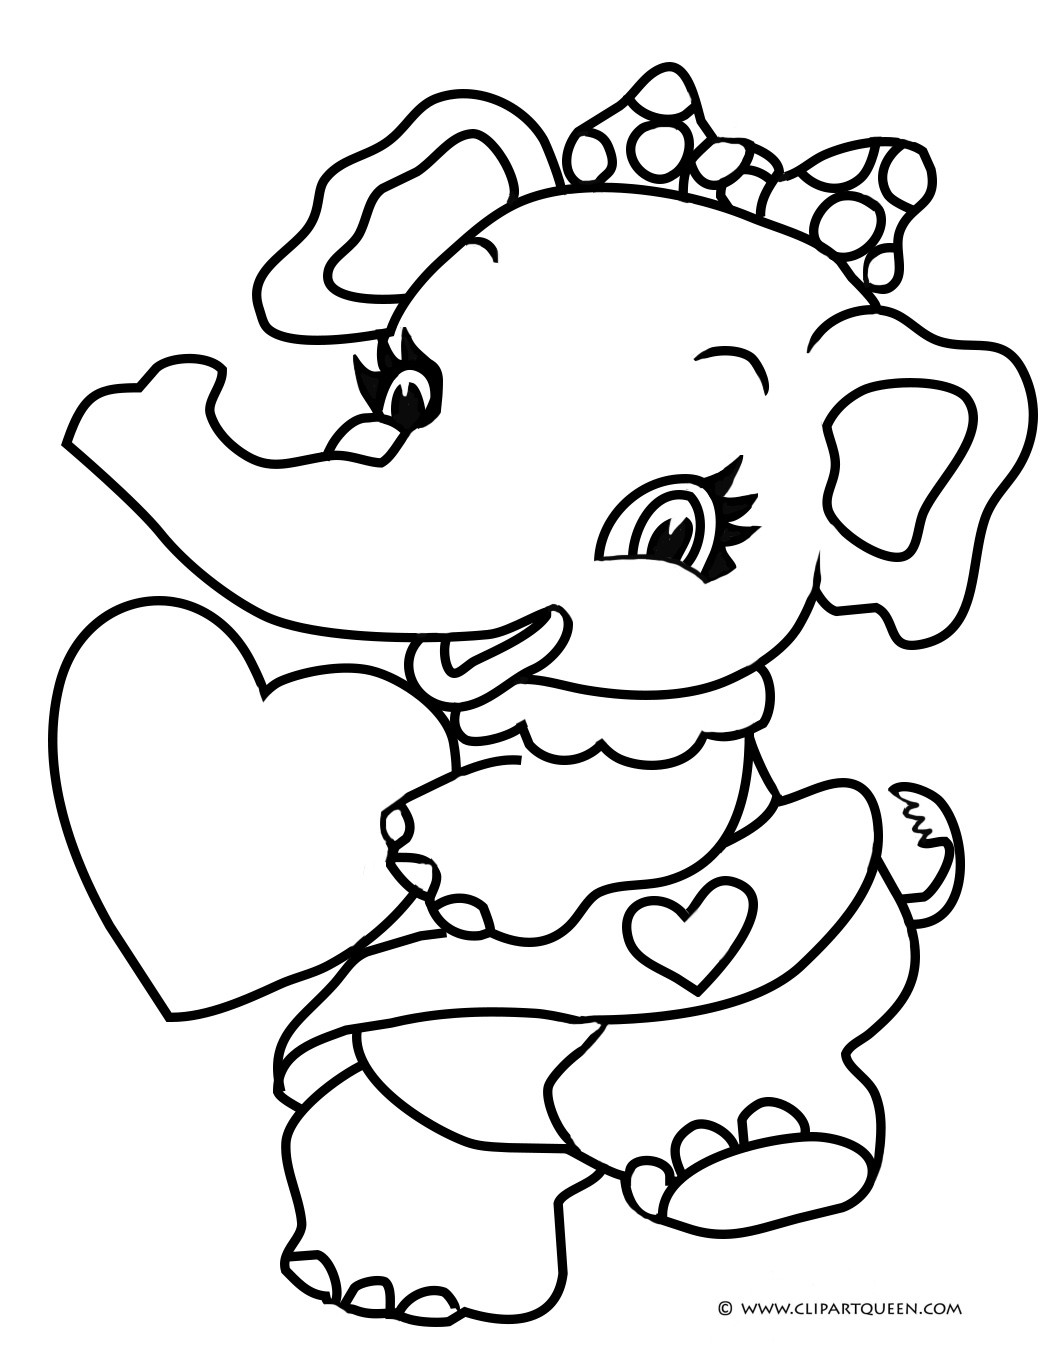 Valentines Day Coloring Pages Printable
 15 Valentine s Day coloring pages